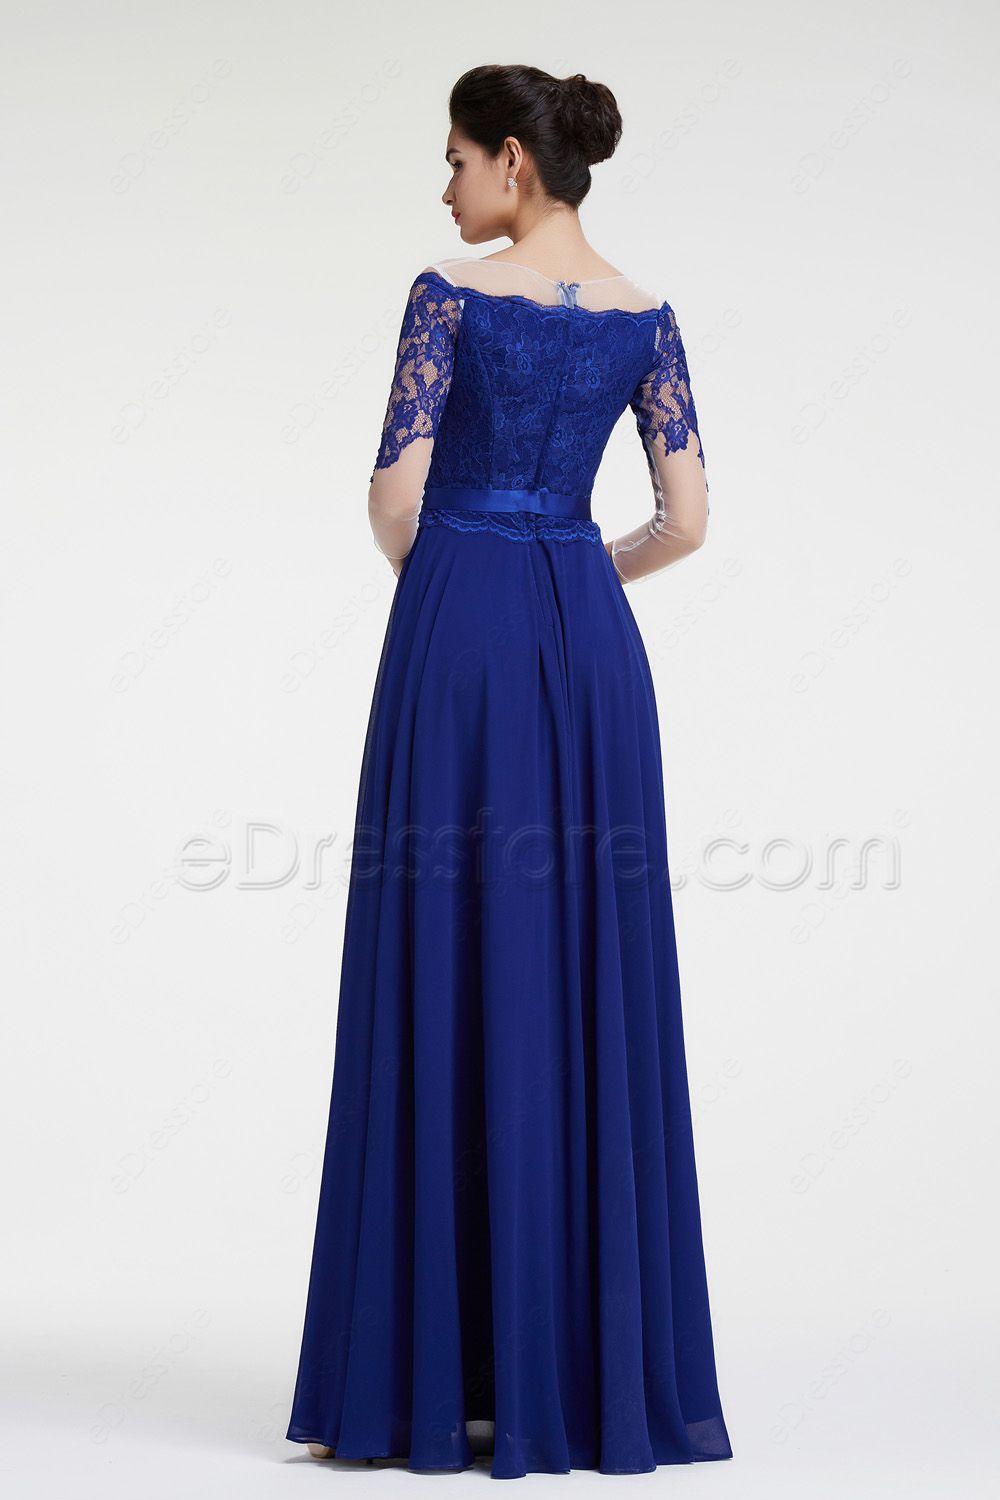 Royal Blue Lace Mother of the Bride Dresses with Sleeves | eDresstore